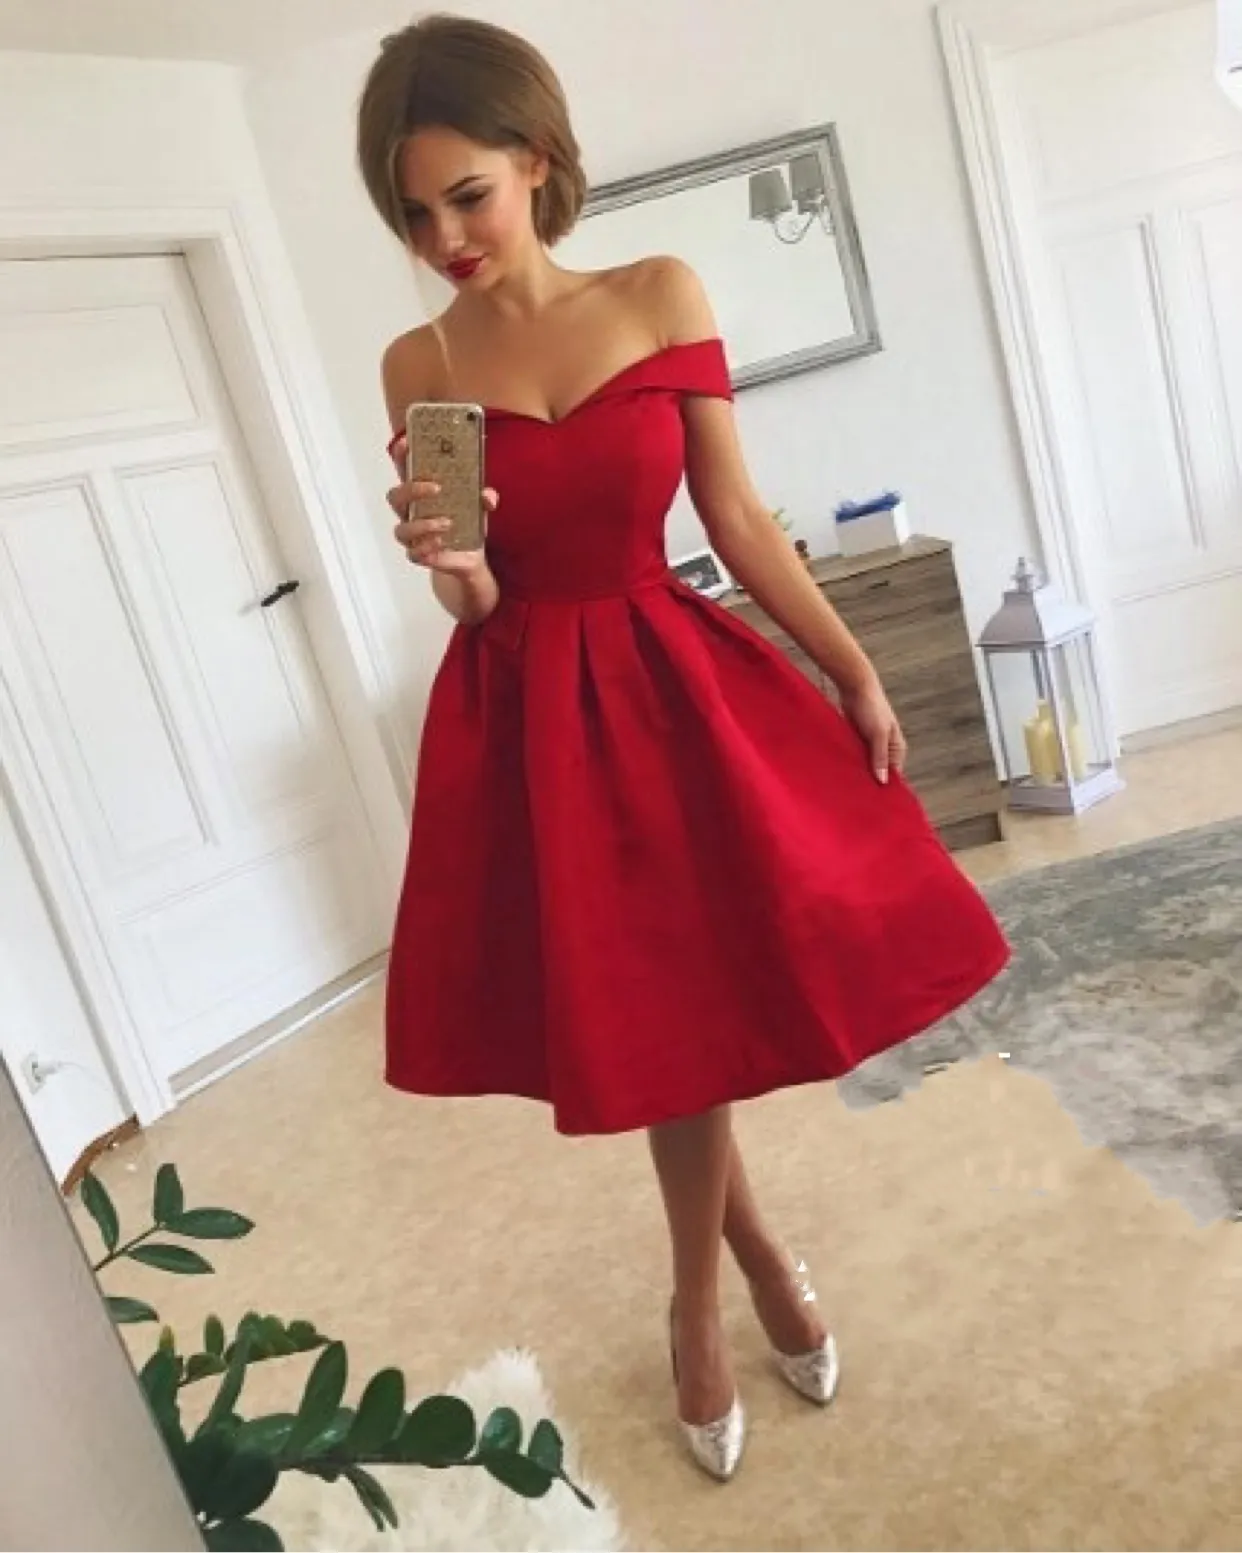 Glitter Red Sequins Homecoming Dress Short V Neck Bodycon Dresses For Women  Backless Criss-cross Prom Party Cocktail - Cocktail Dresses - AliExpress